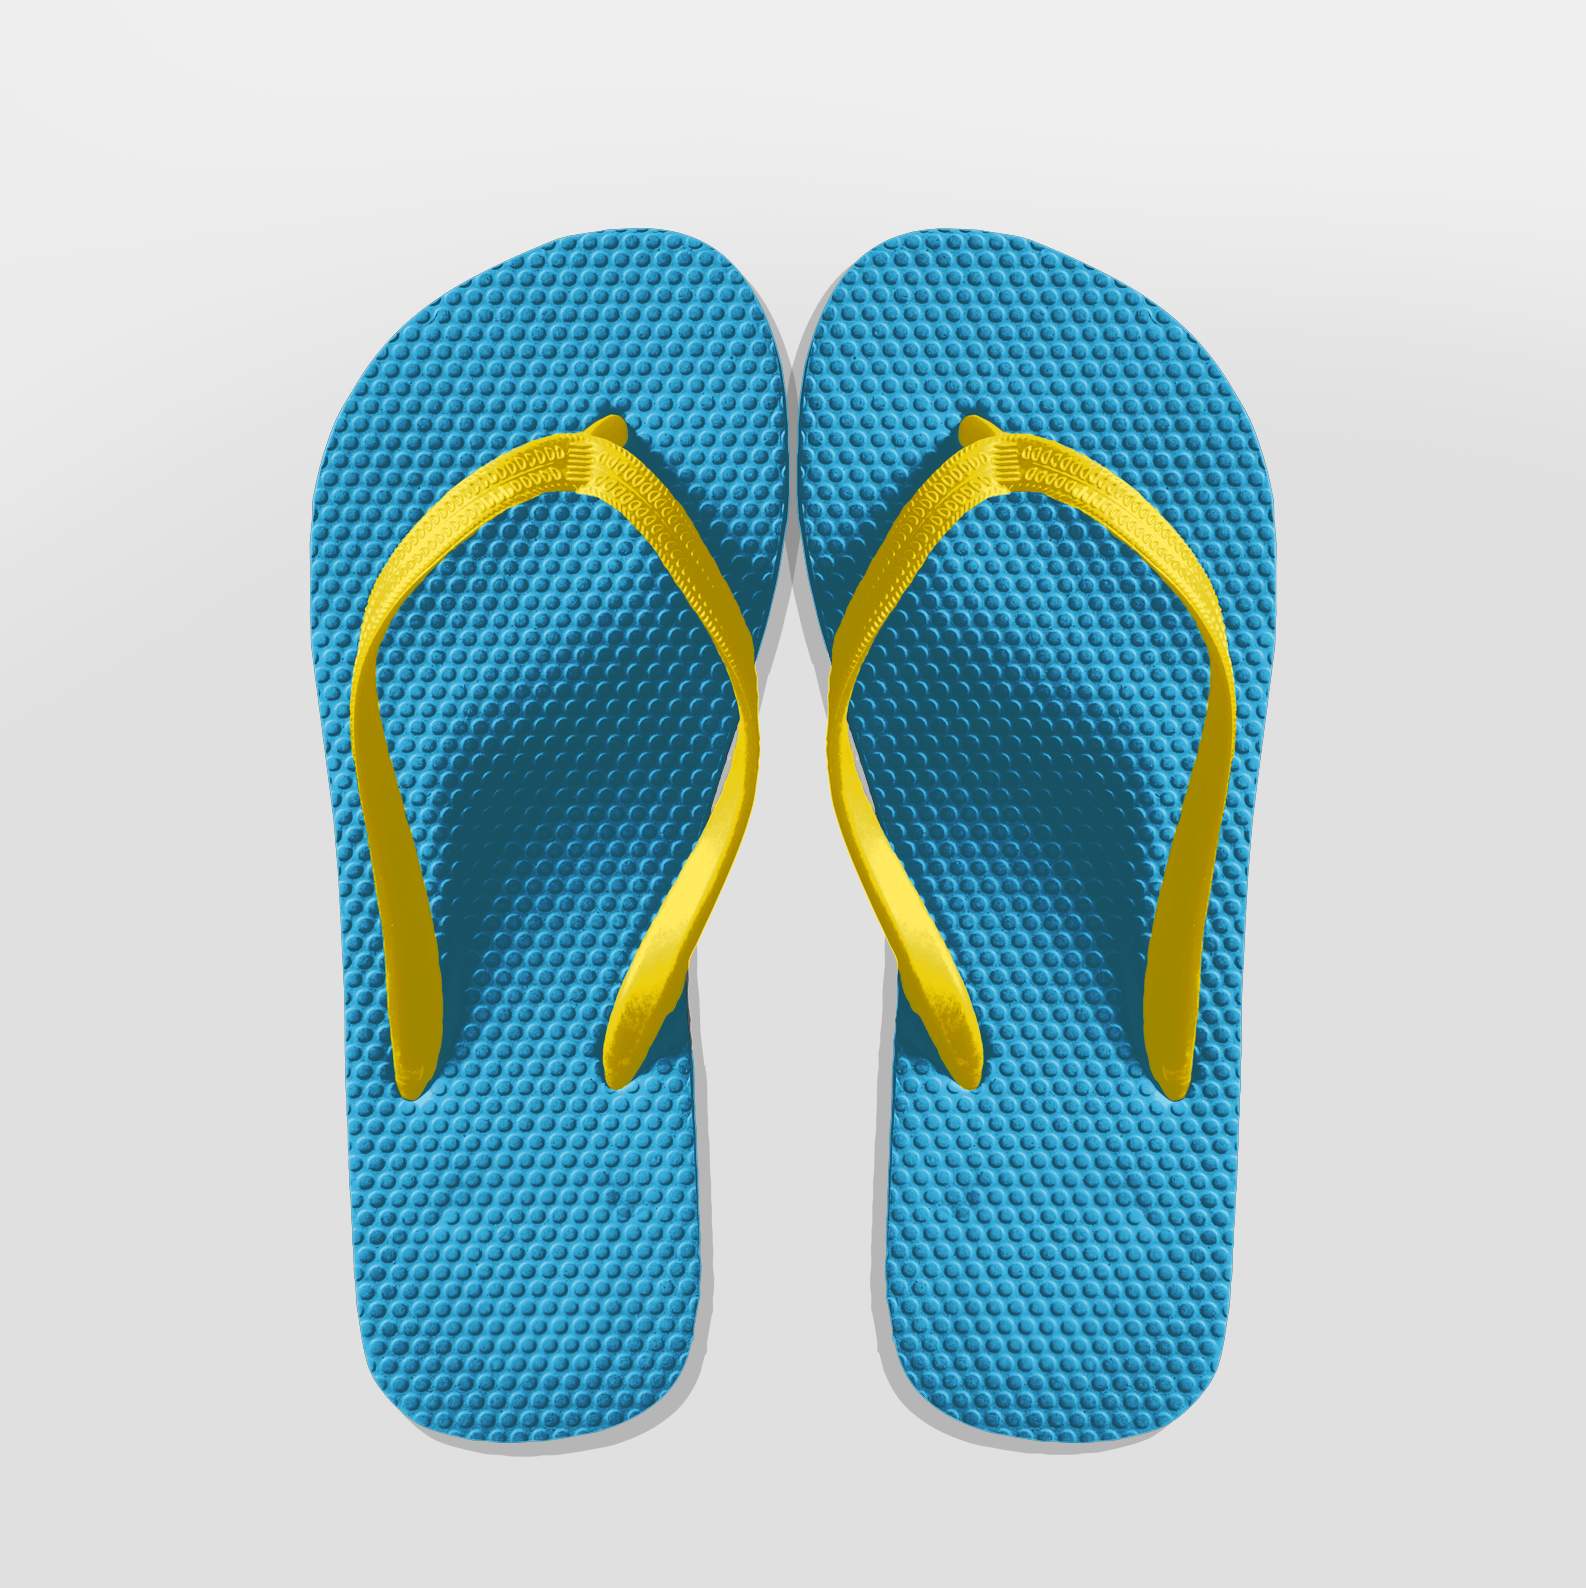 Download 48+ Flip Flops Mockup Free Gif Yellowimages - Free PSD ...